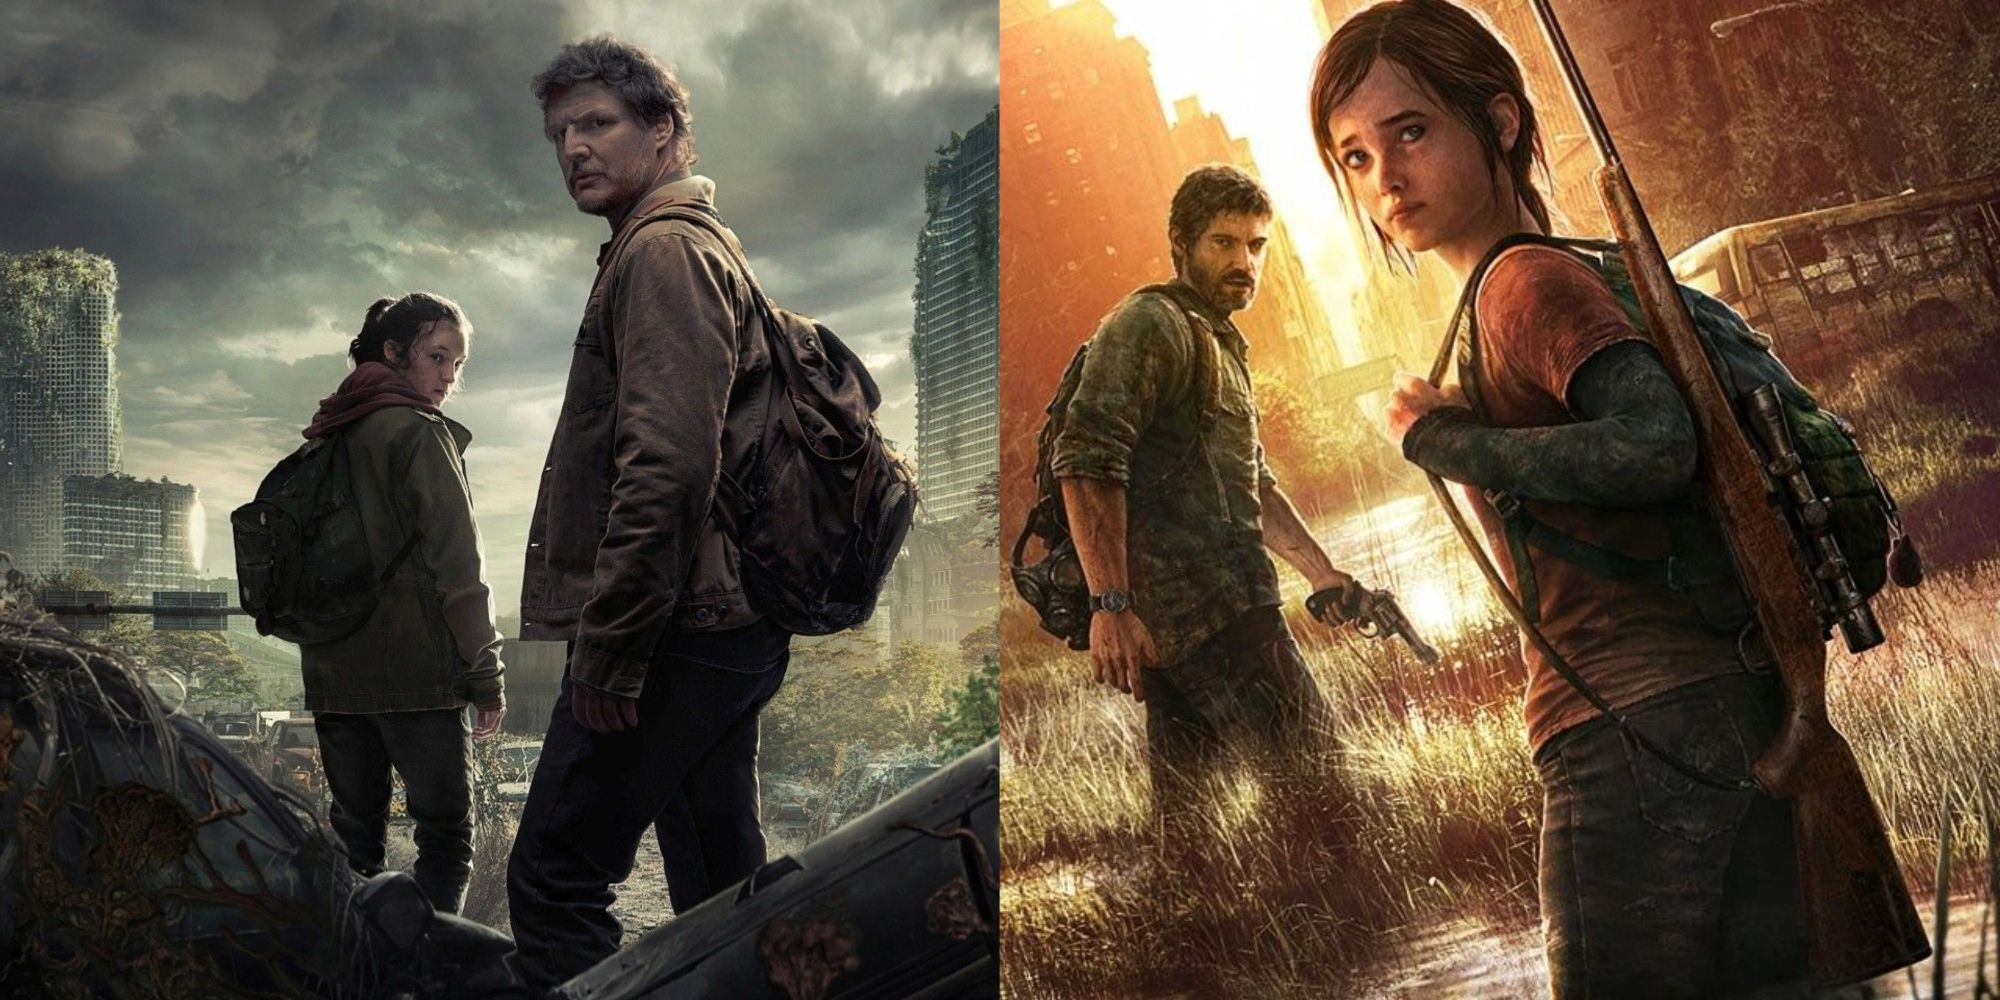 A split image featuring the HBO show poster with Bella Ramsey's and Pedro Pascal's Joel and Ellie, and the original cover art for the 2013 game with Joel and Ellie.